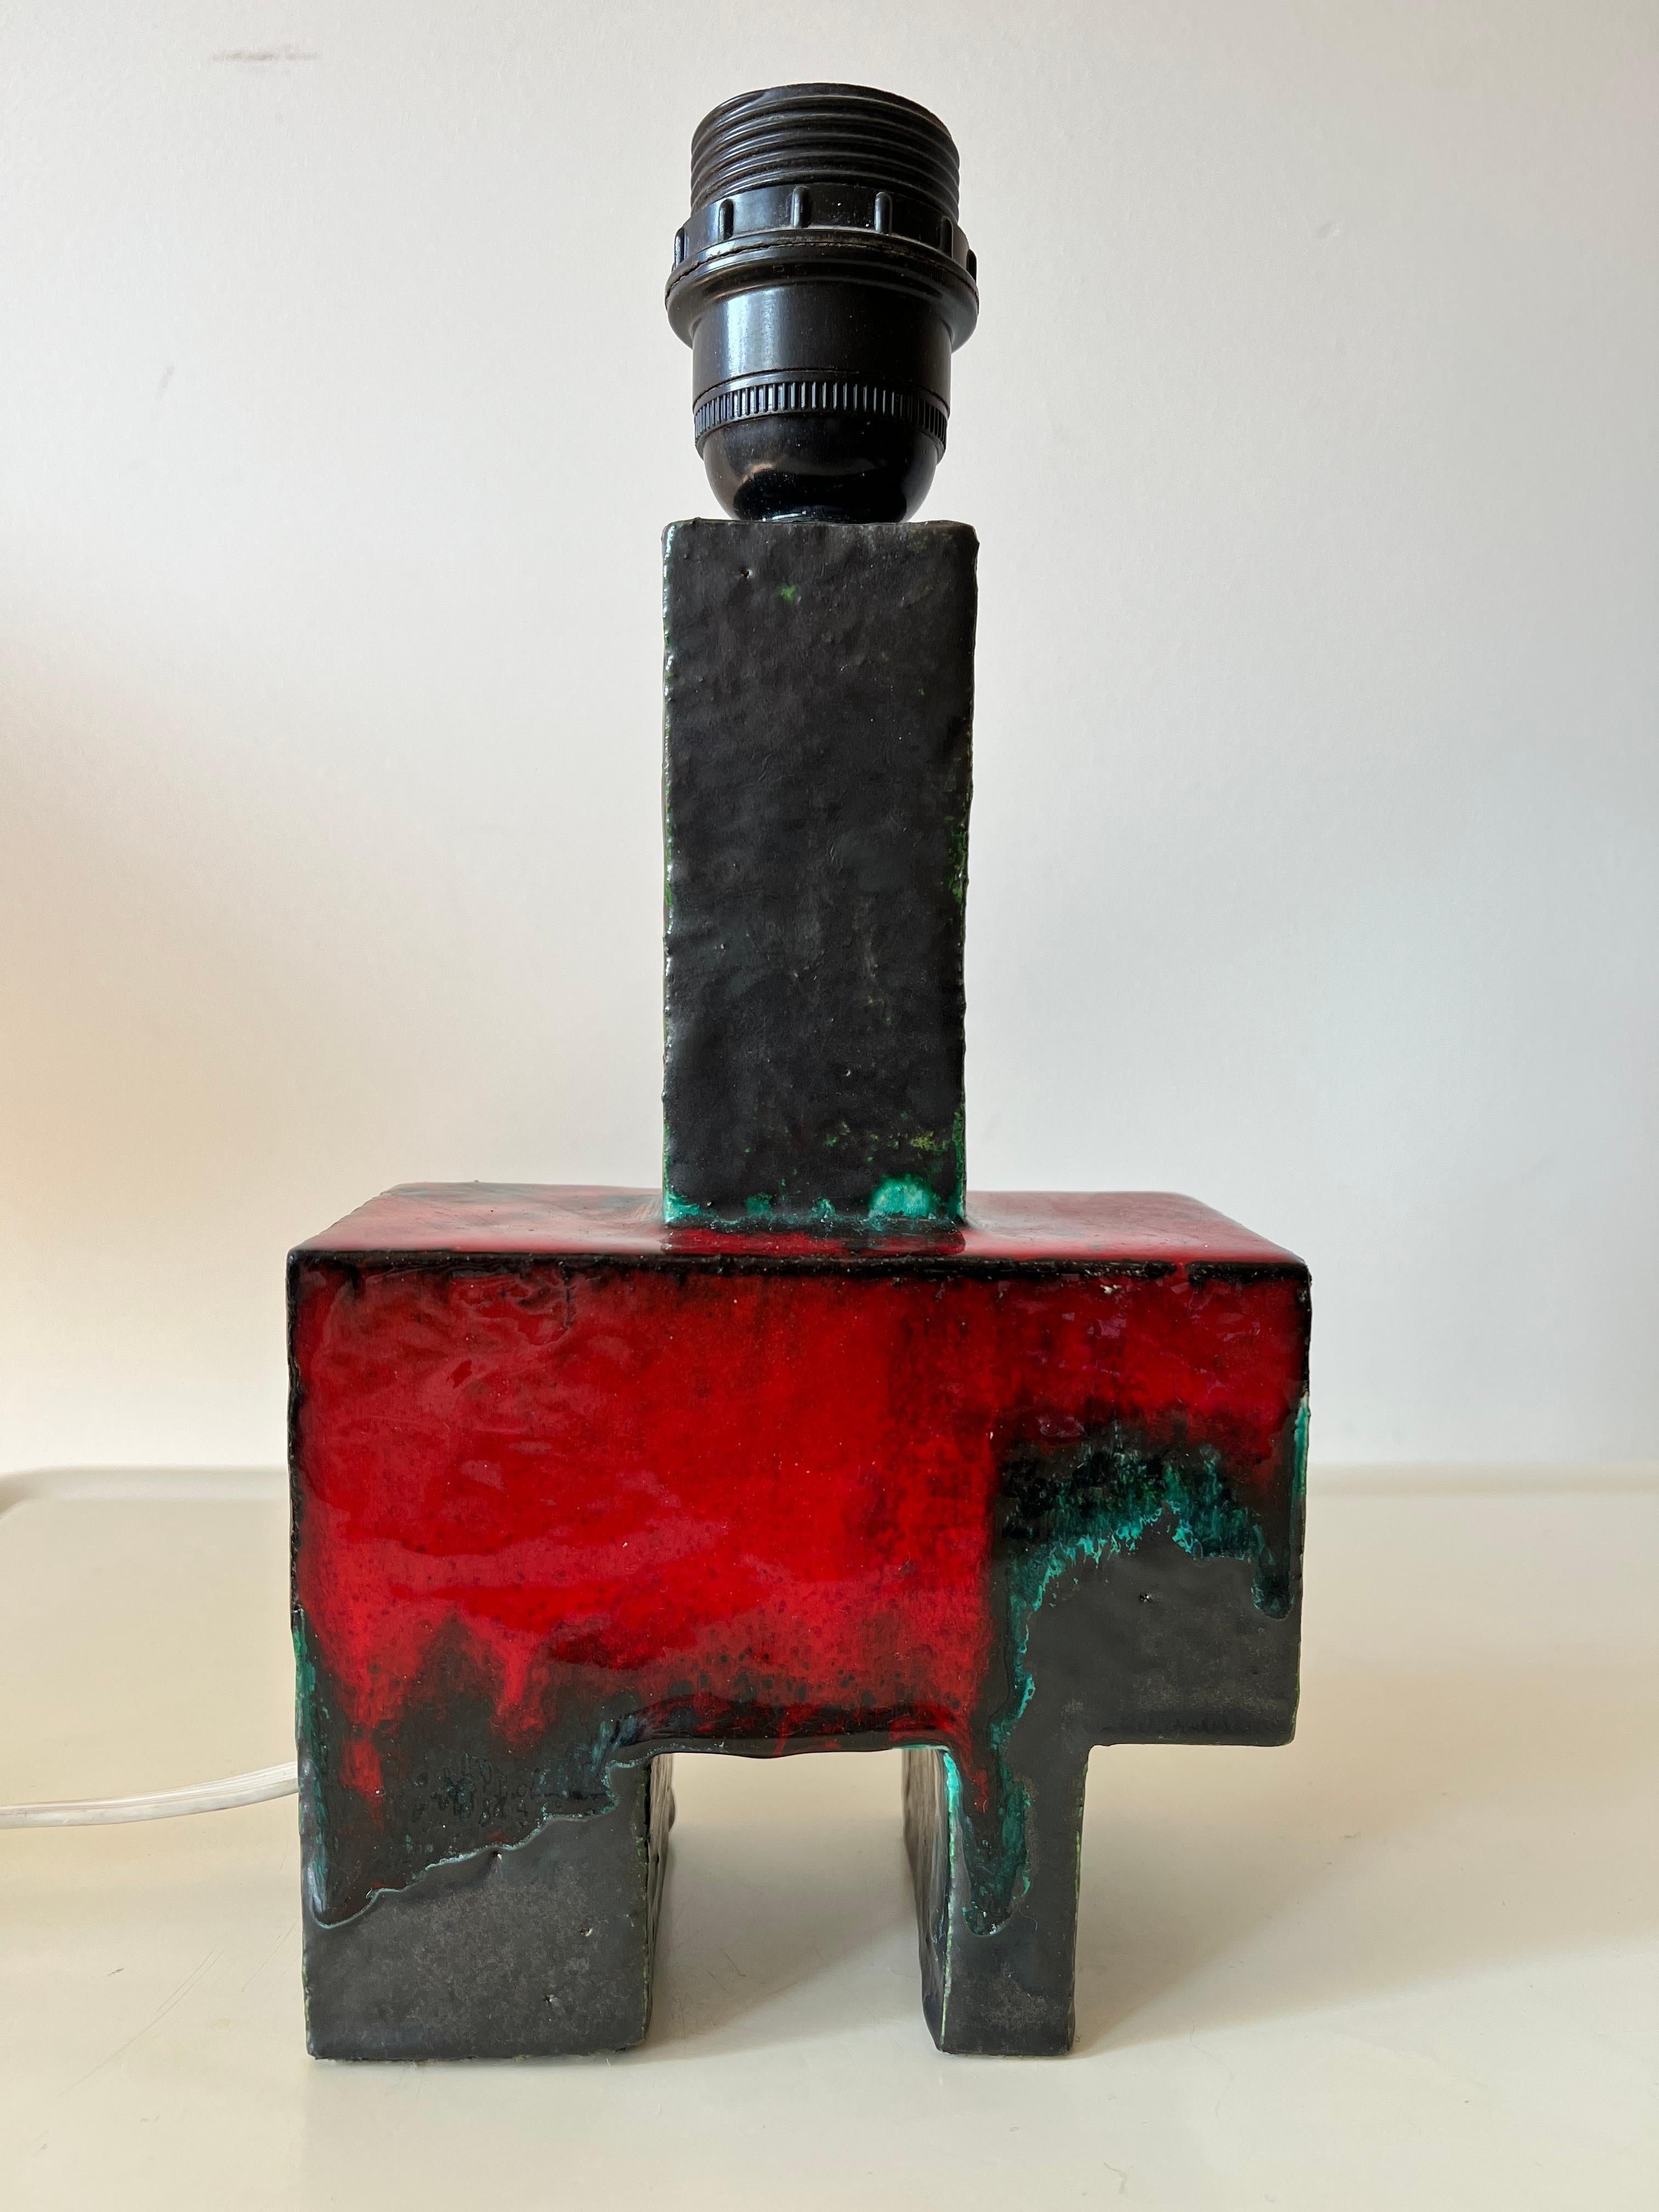 Esthetically pleasing hand crafted ceramic lamp stand (with original shade). Beautifully glazed by a skilled artisan. Interestingly it has typically cubist shapes and vivid colours. Definitely a one off!

We still have the (probably) original